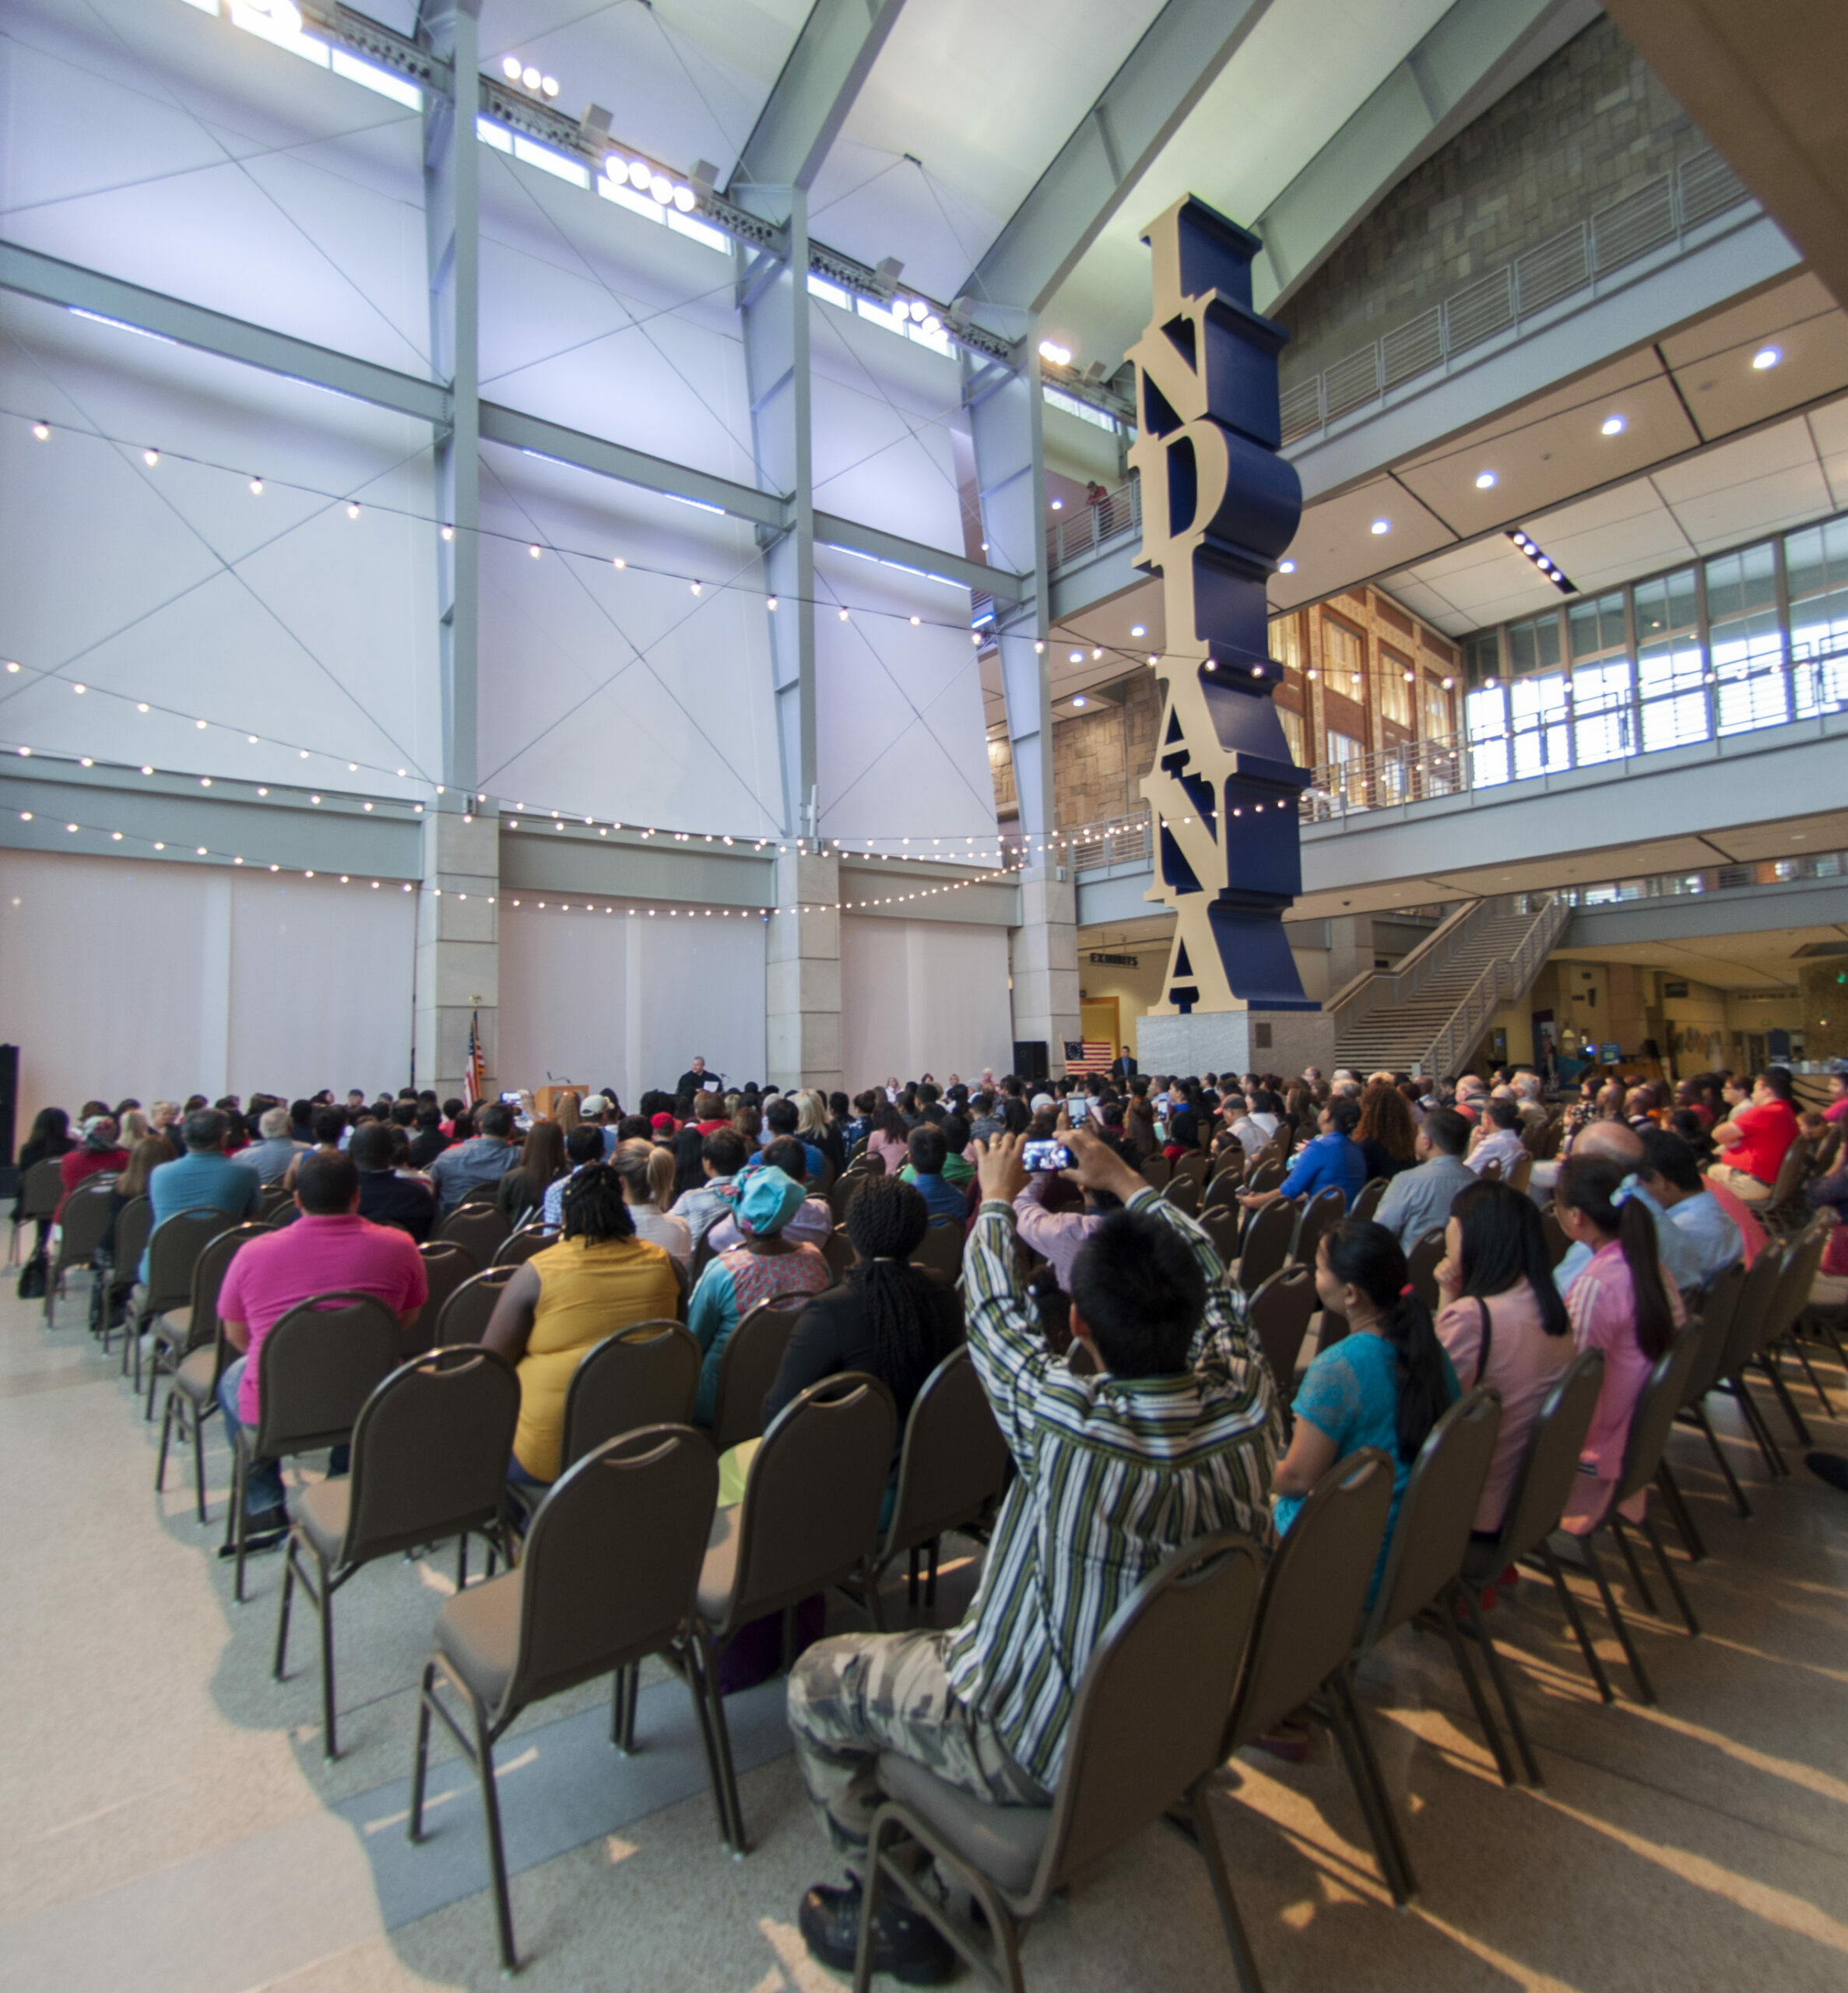 hundreds of people sitting in chairs in the Great Hall in front of the Indiana obelisk at the Indiana State Museum